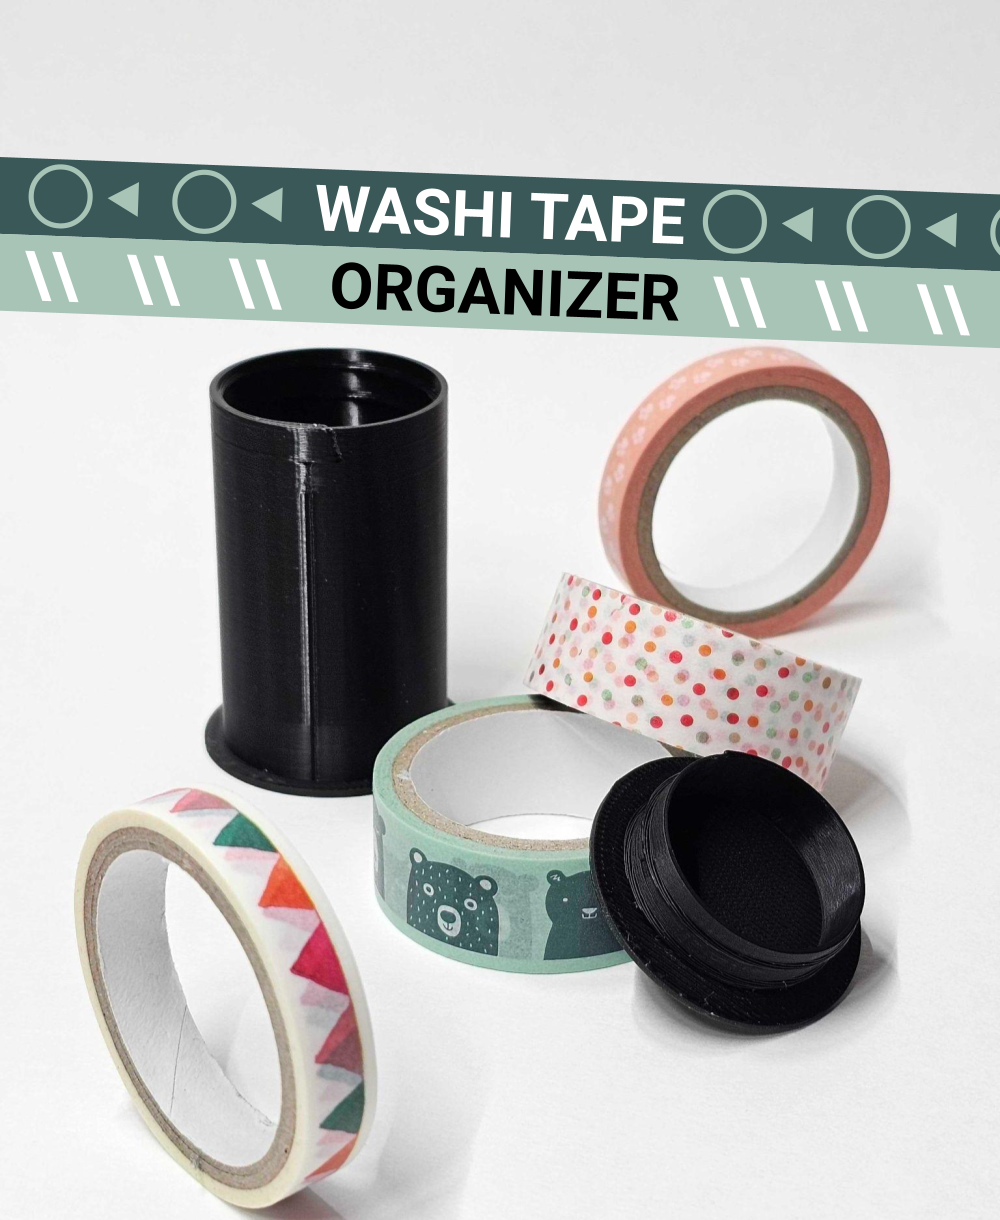 Washi tape holder  Stash supplies inside with screw-on lid